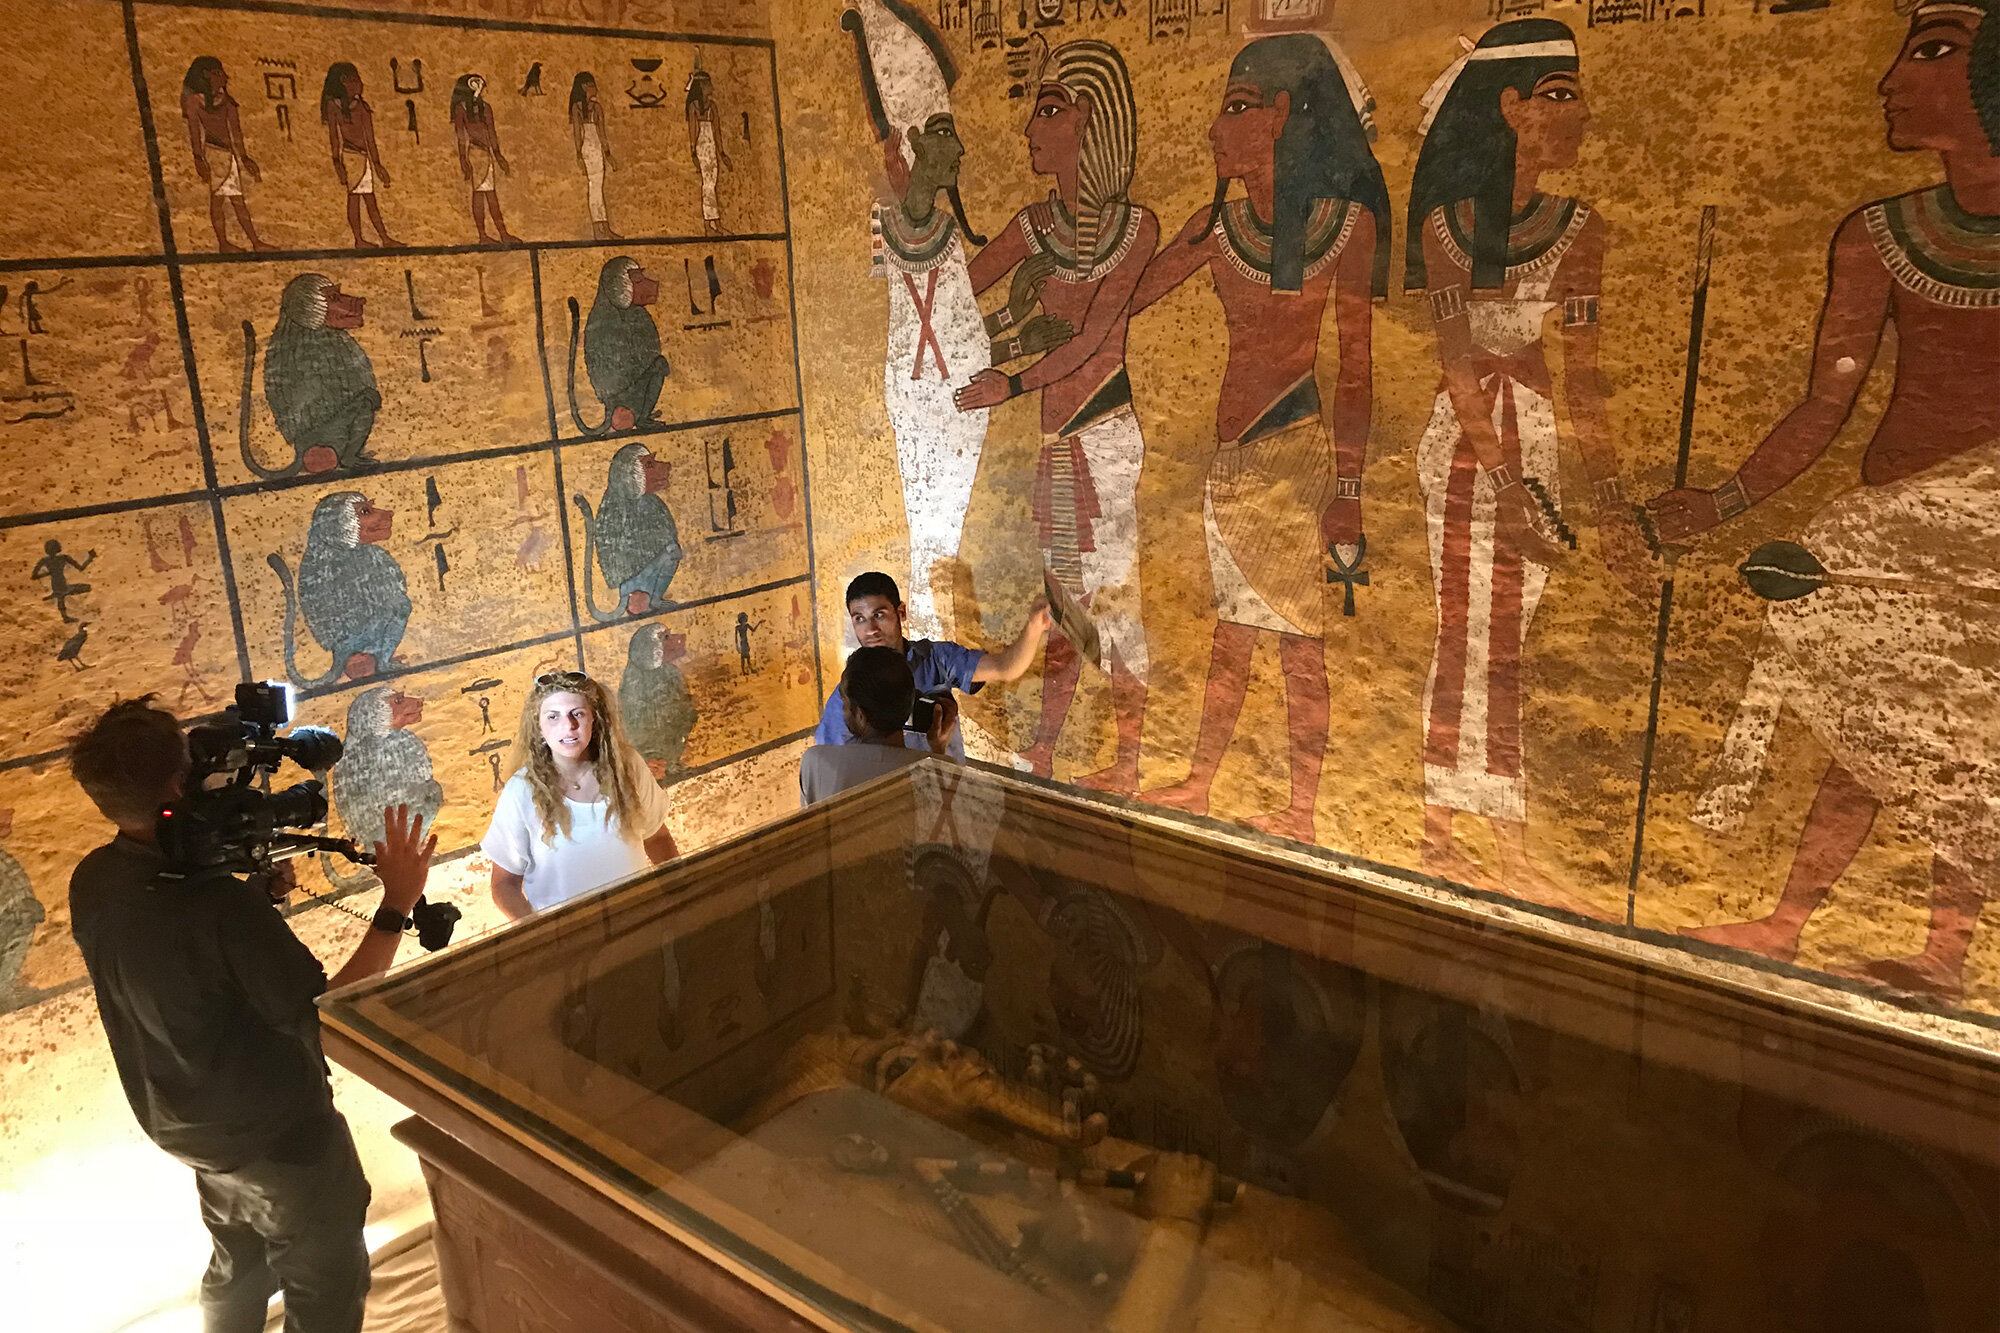 The tomb of Tutankhamun in Egypt's Valley of the Kings